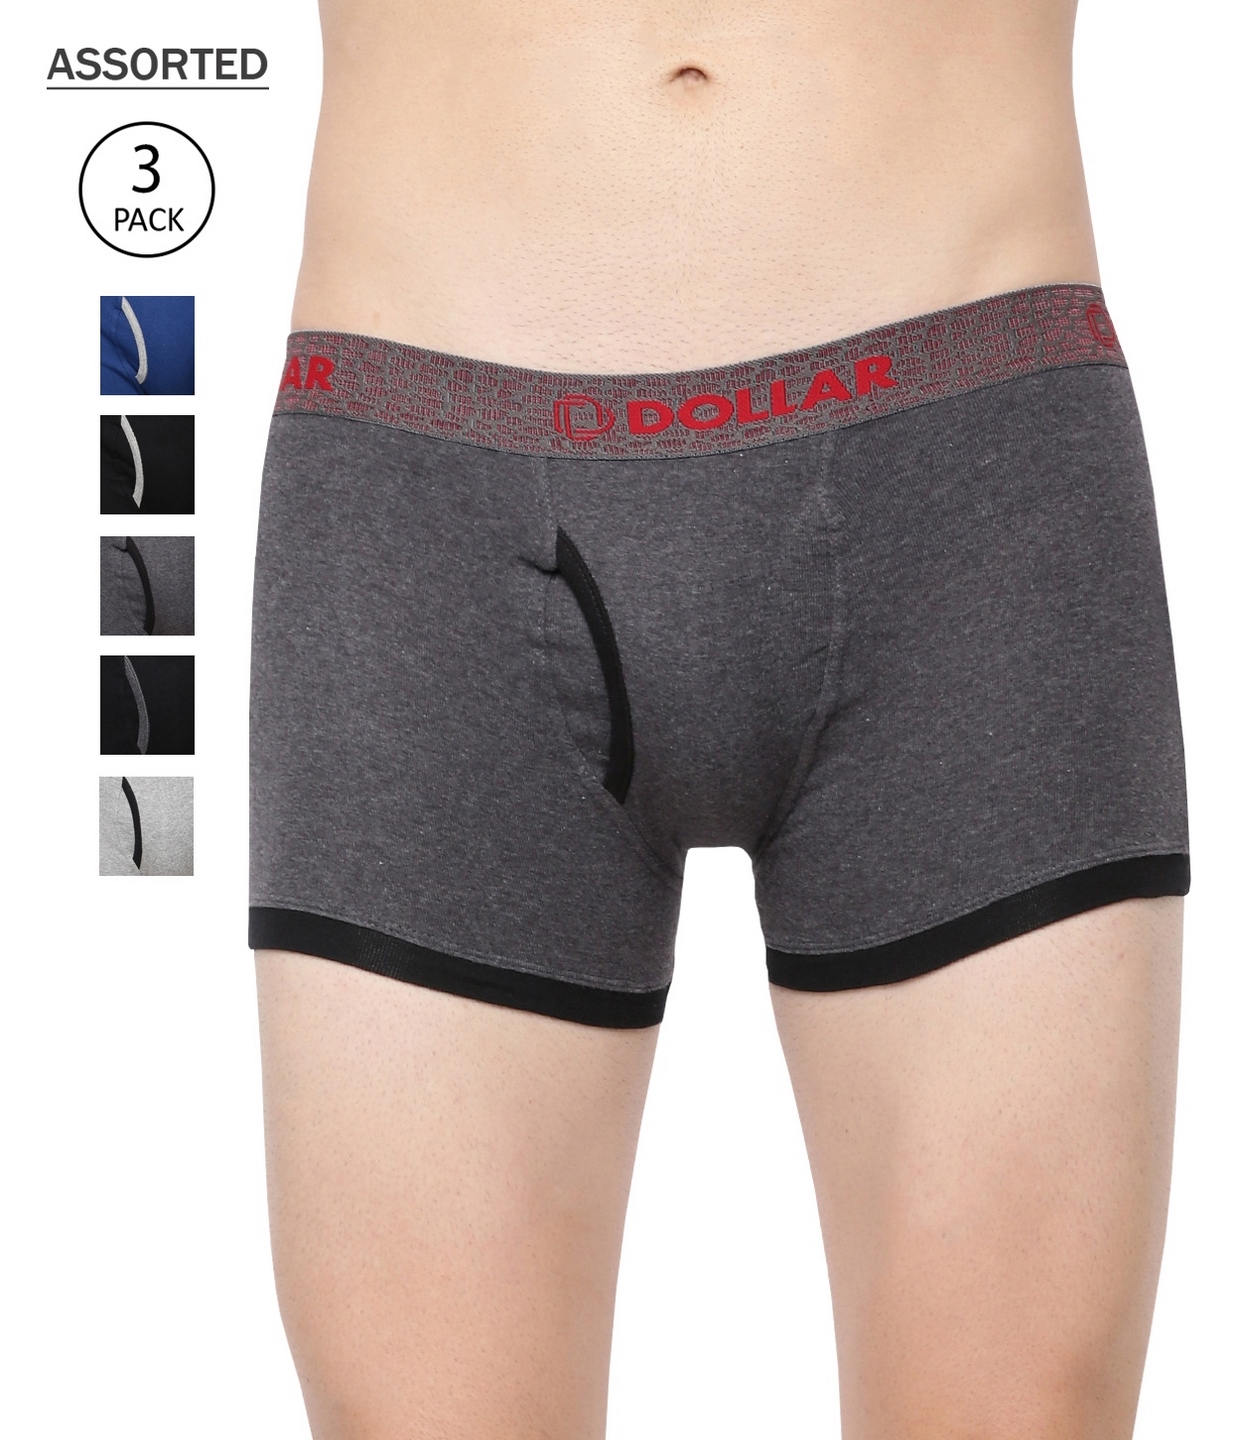 3-PACK OF CONTRAST ASSORTED BOXERS - various